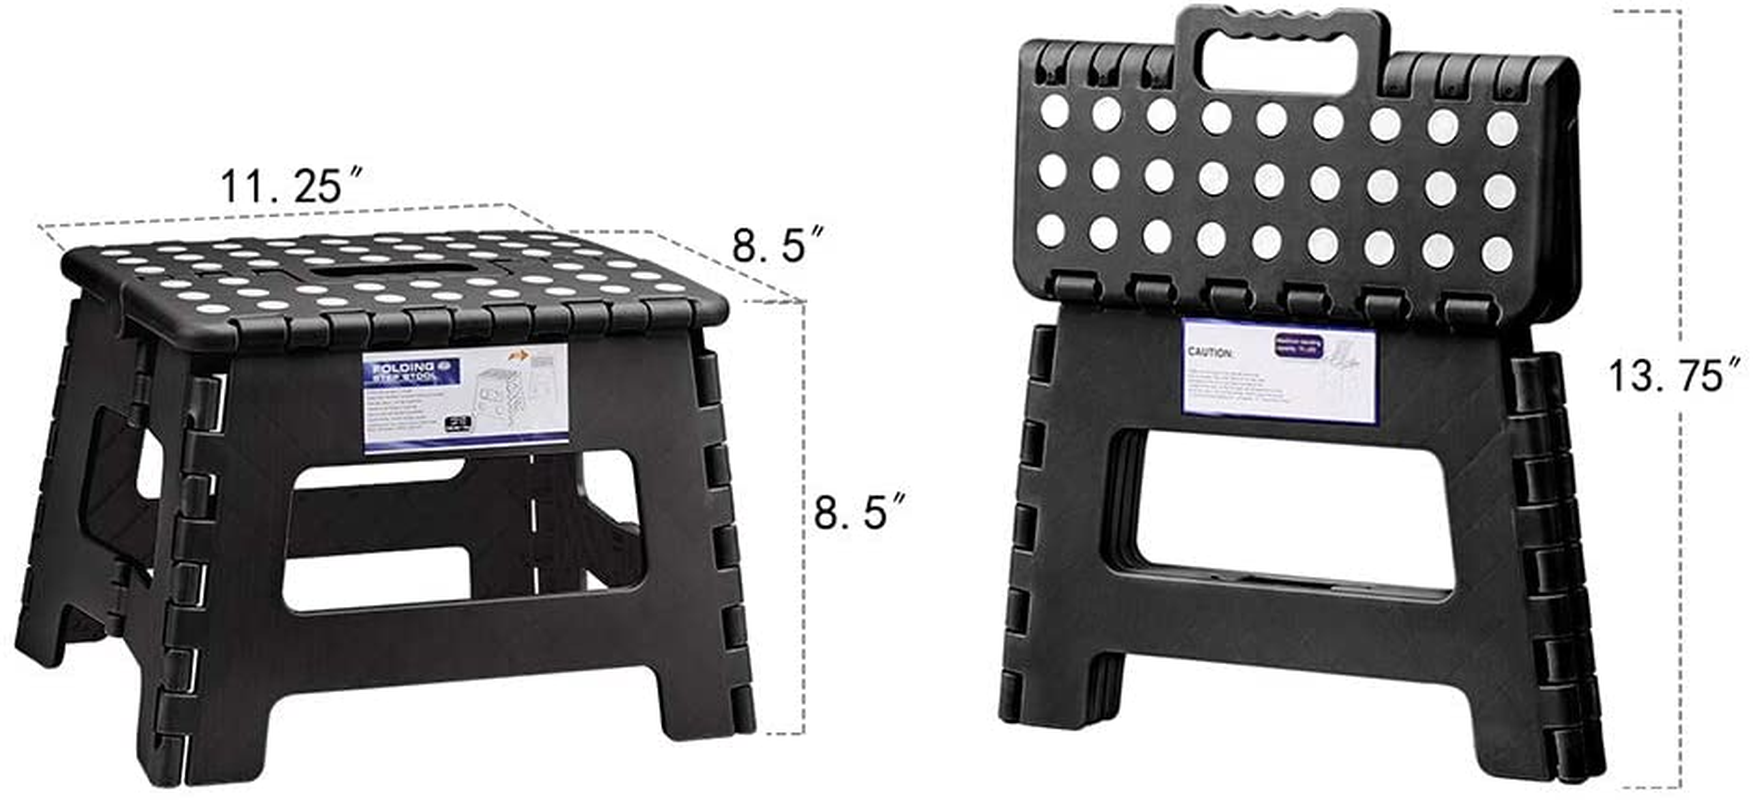 Folding Step Stool 9'' Tall Kids Step Stool Holds up to 300 Lb Plastic Foldable Step Stools for Adults Non-Slip Surface with Carry Handle Collapsible Stool for Home and Outdoor(Black)